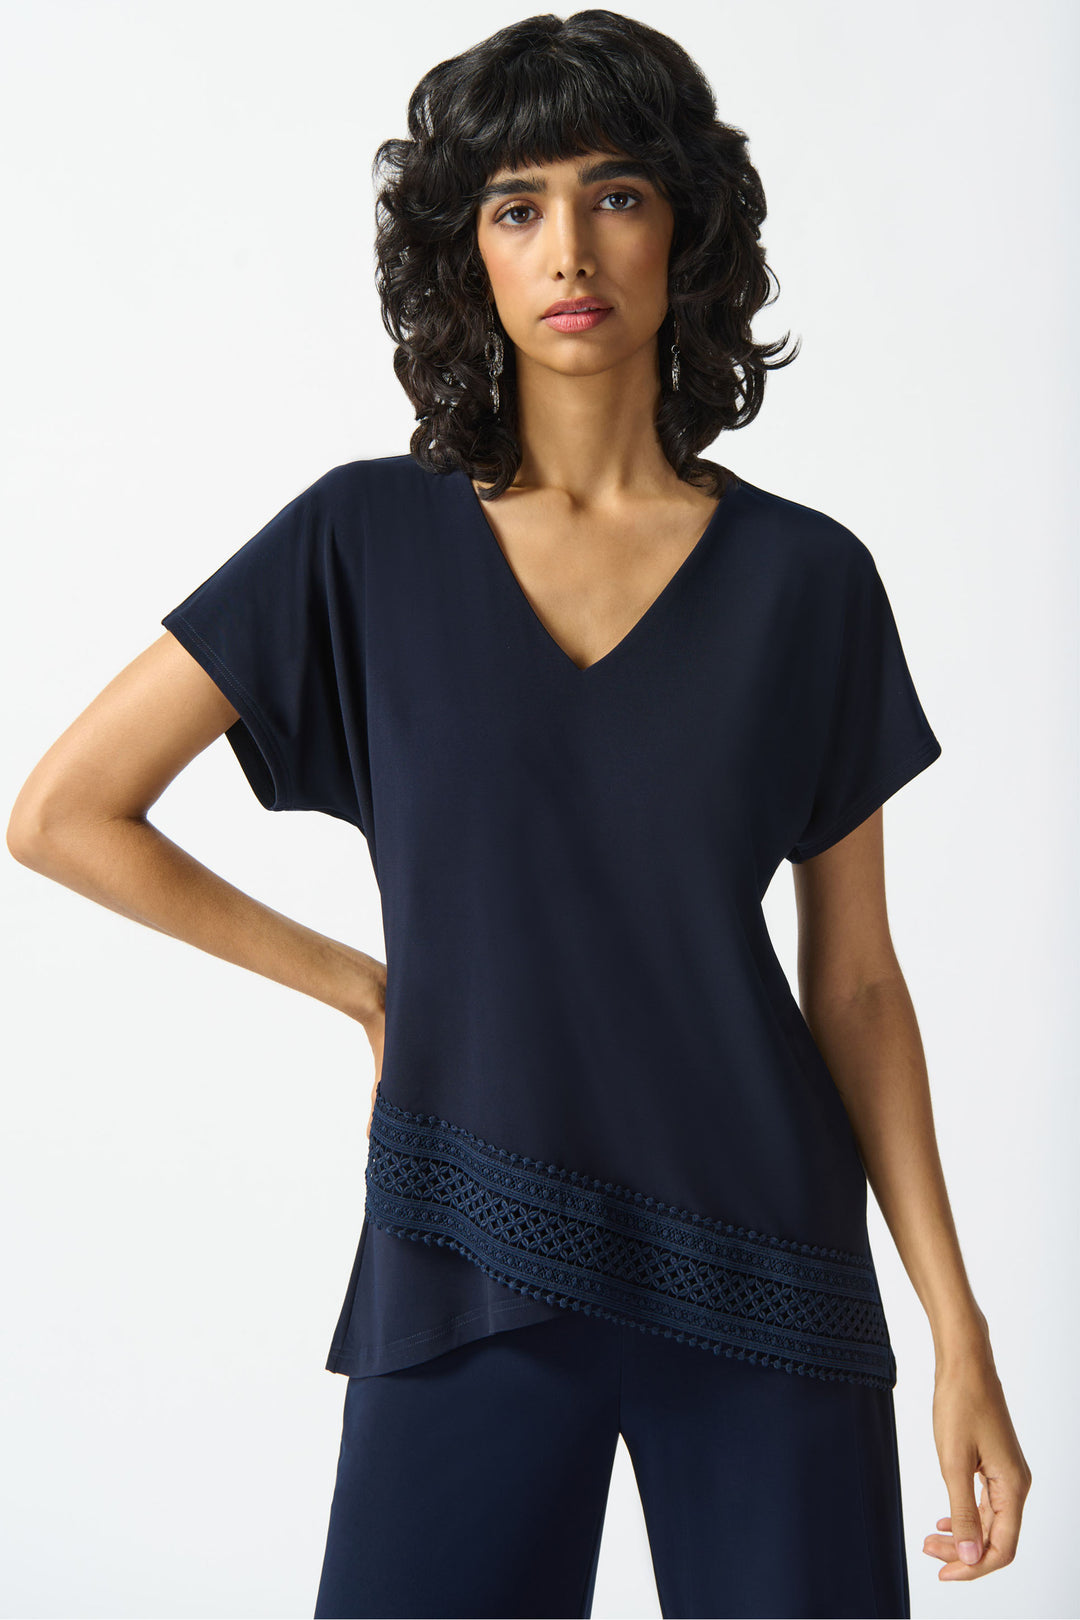 Indulge in style with our V-Neck Top featuring a sharp cut and lovely lace hem for a touch of sophistication. 